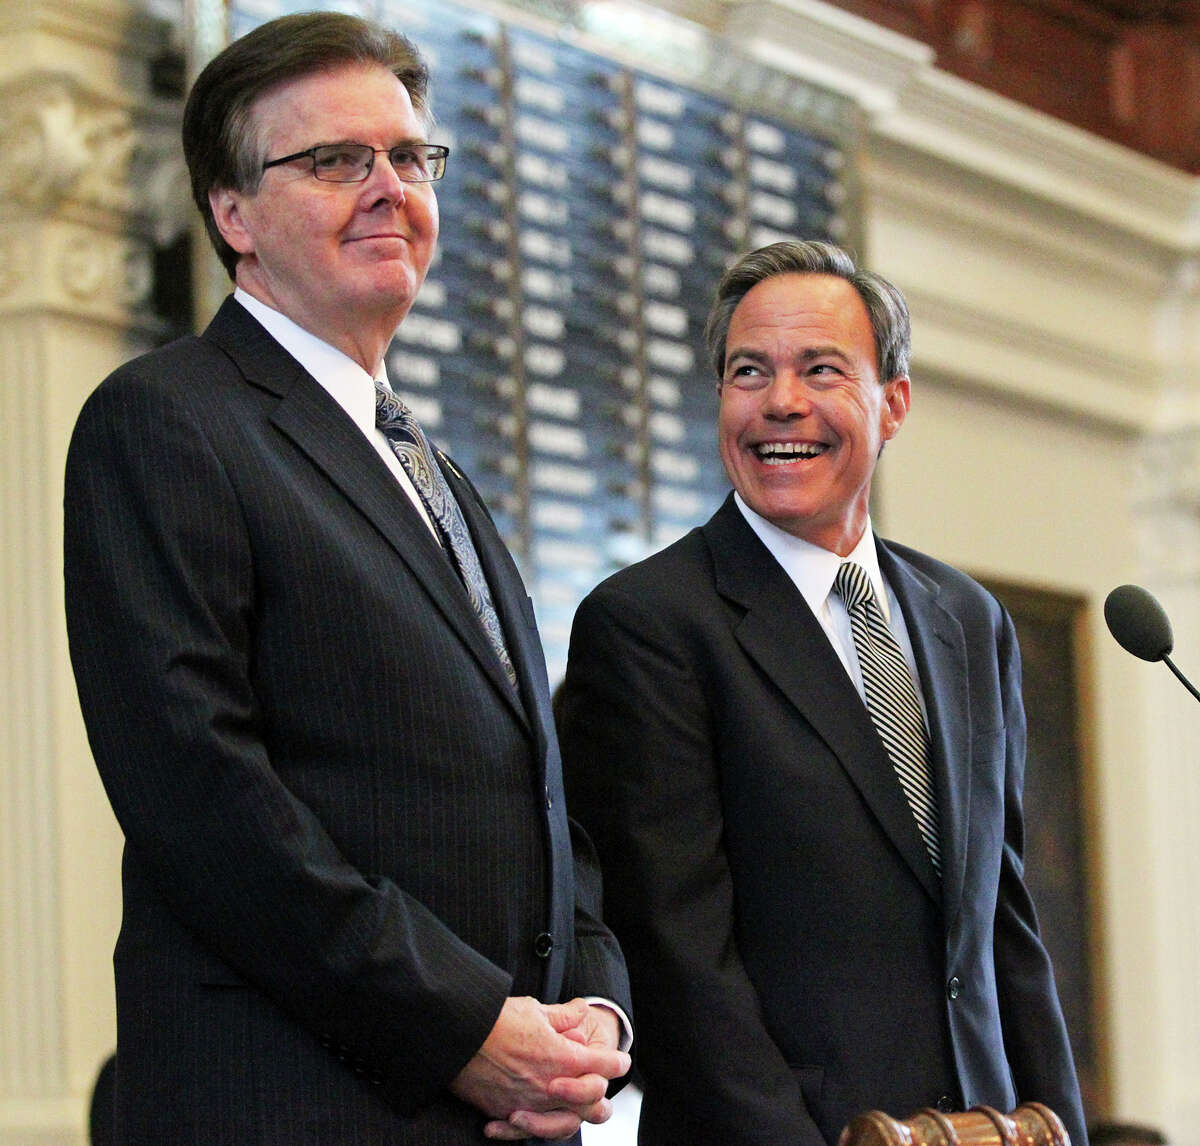 Lt. Gov. Dan Patrick and Speaker Joe Straus have instructed the Texas Ethics Commission to keep the daily allowance for lawmakers flat at $190 for the upcoming legislative session.